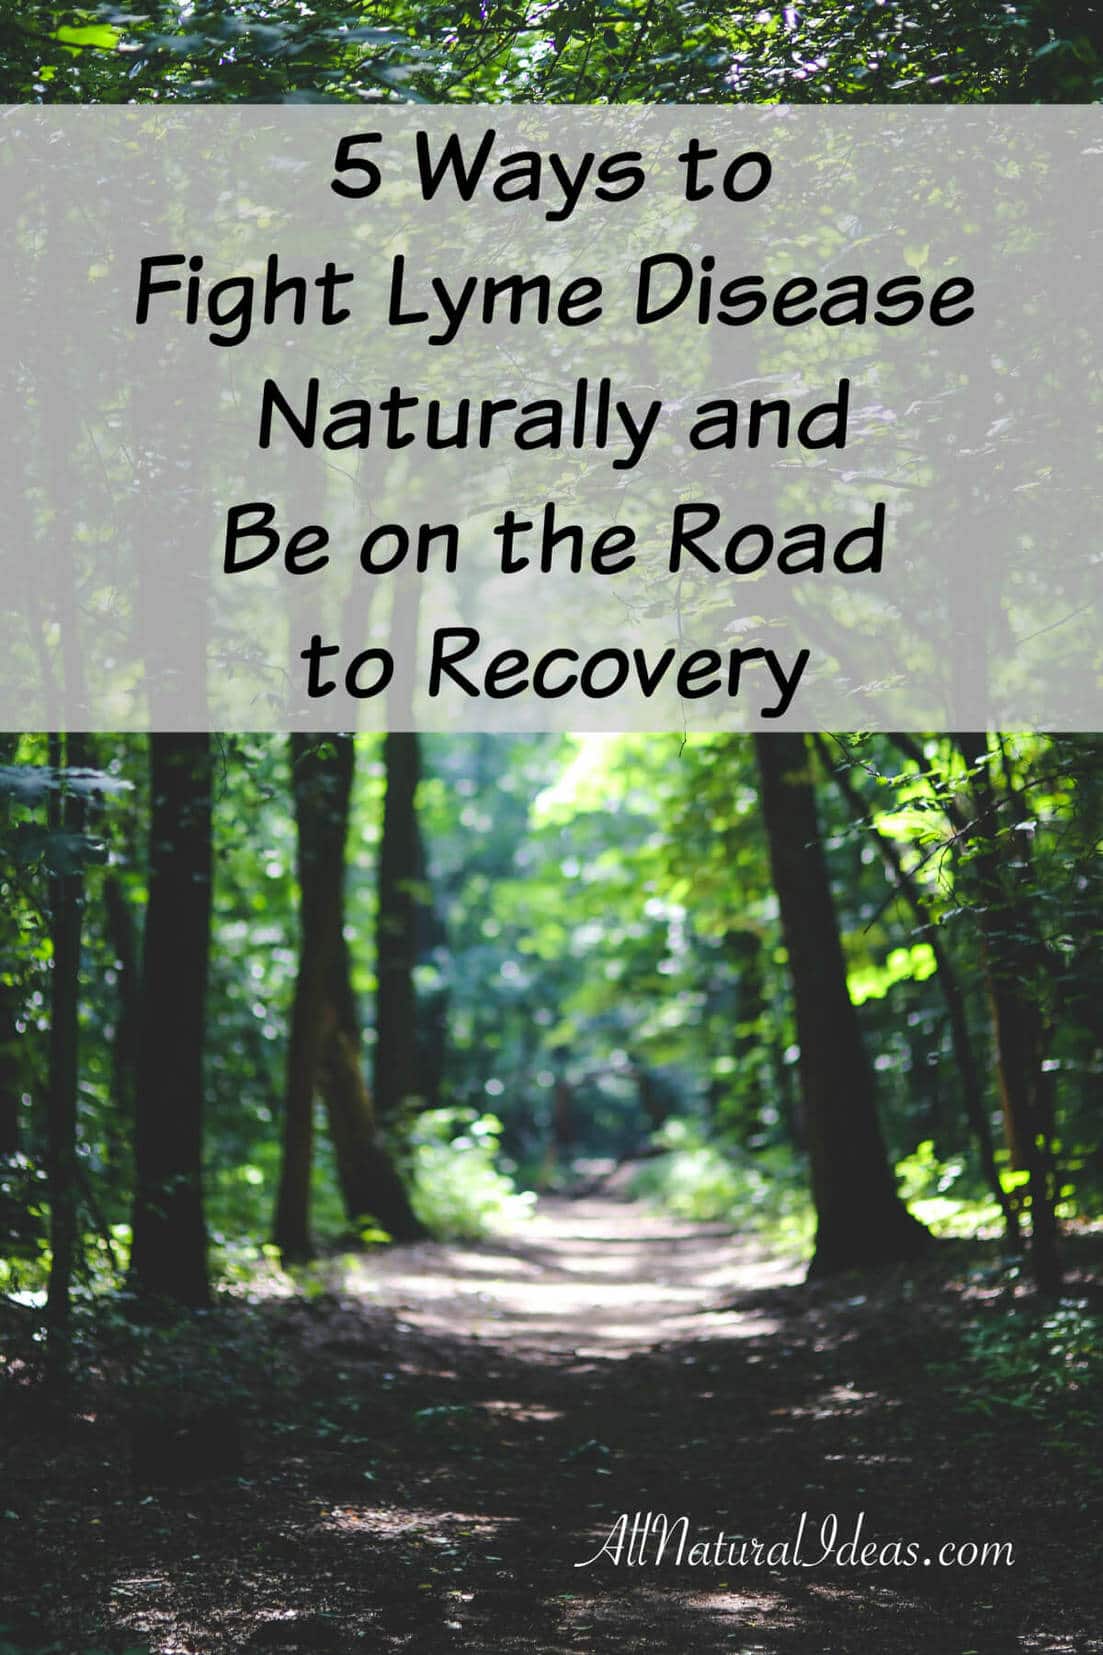 Fight lyme disease naturally